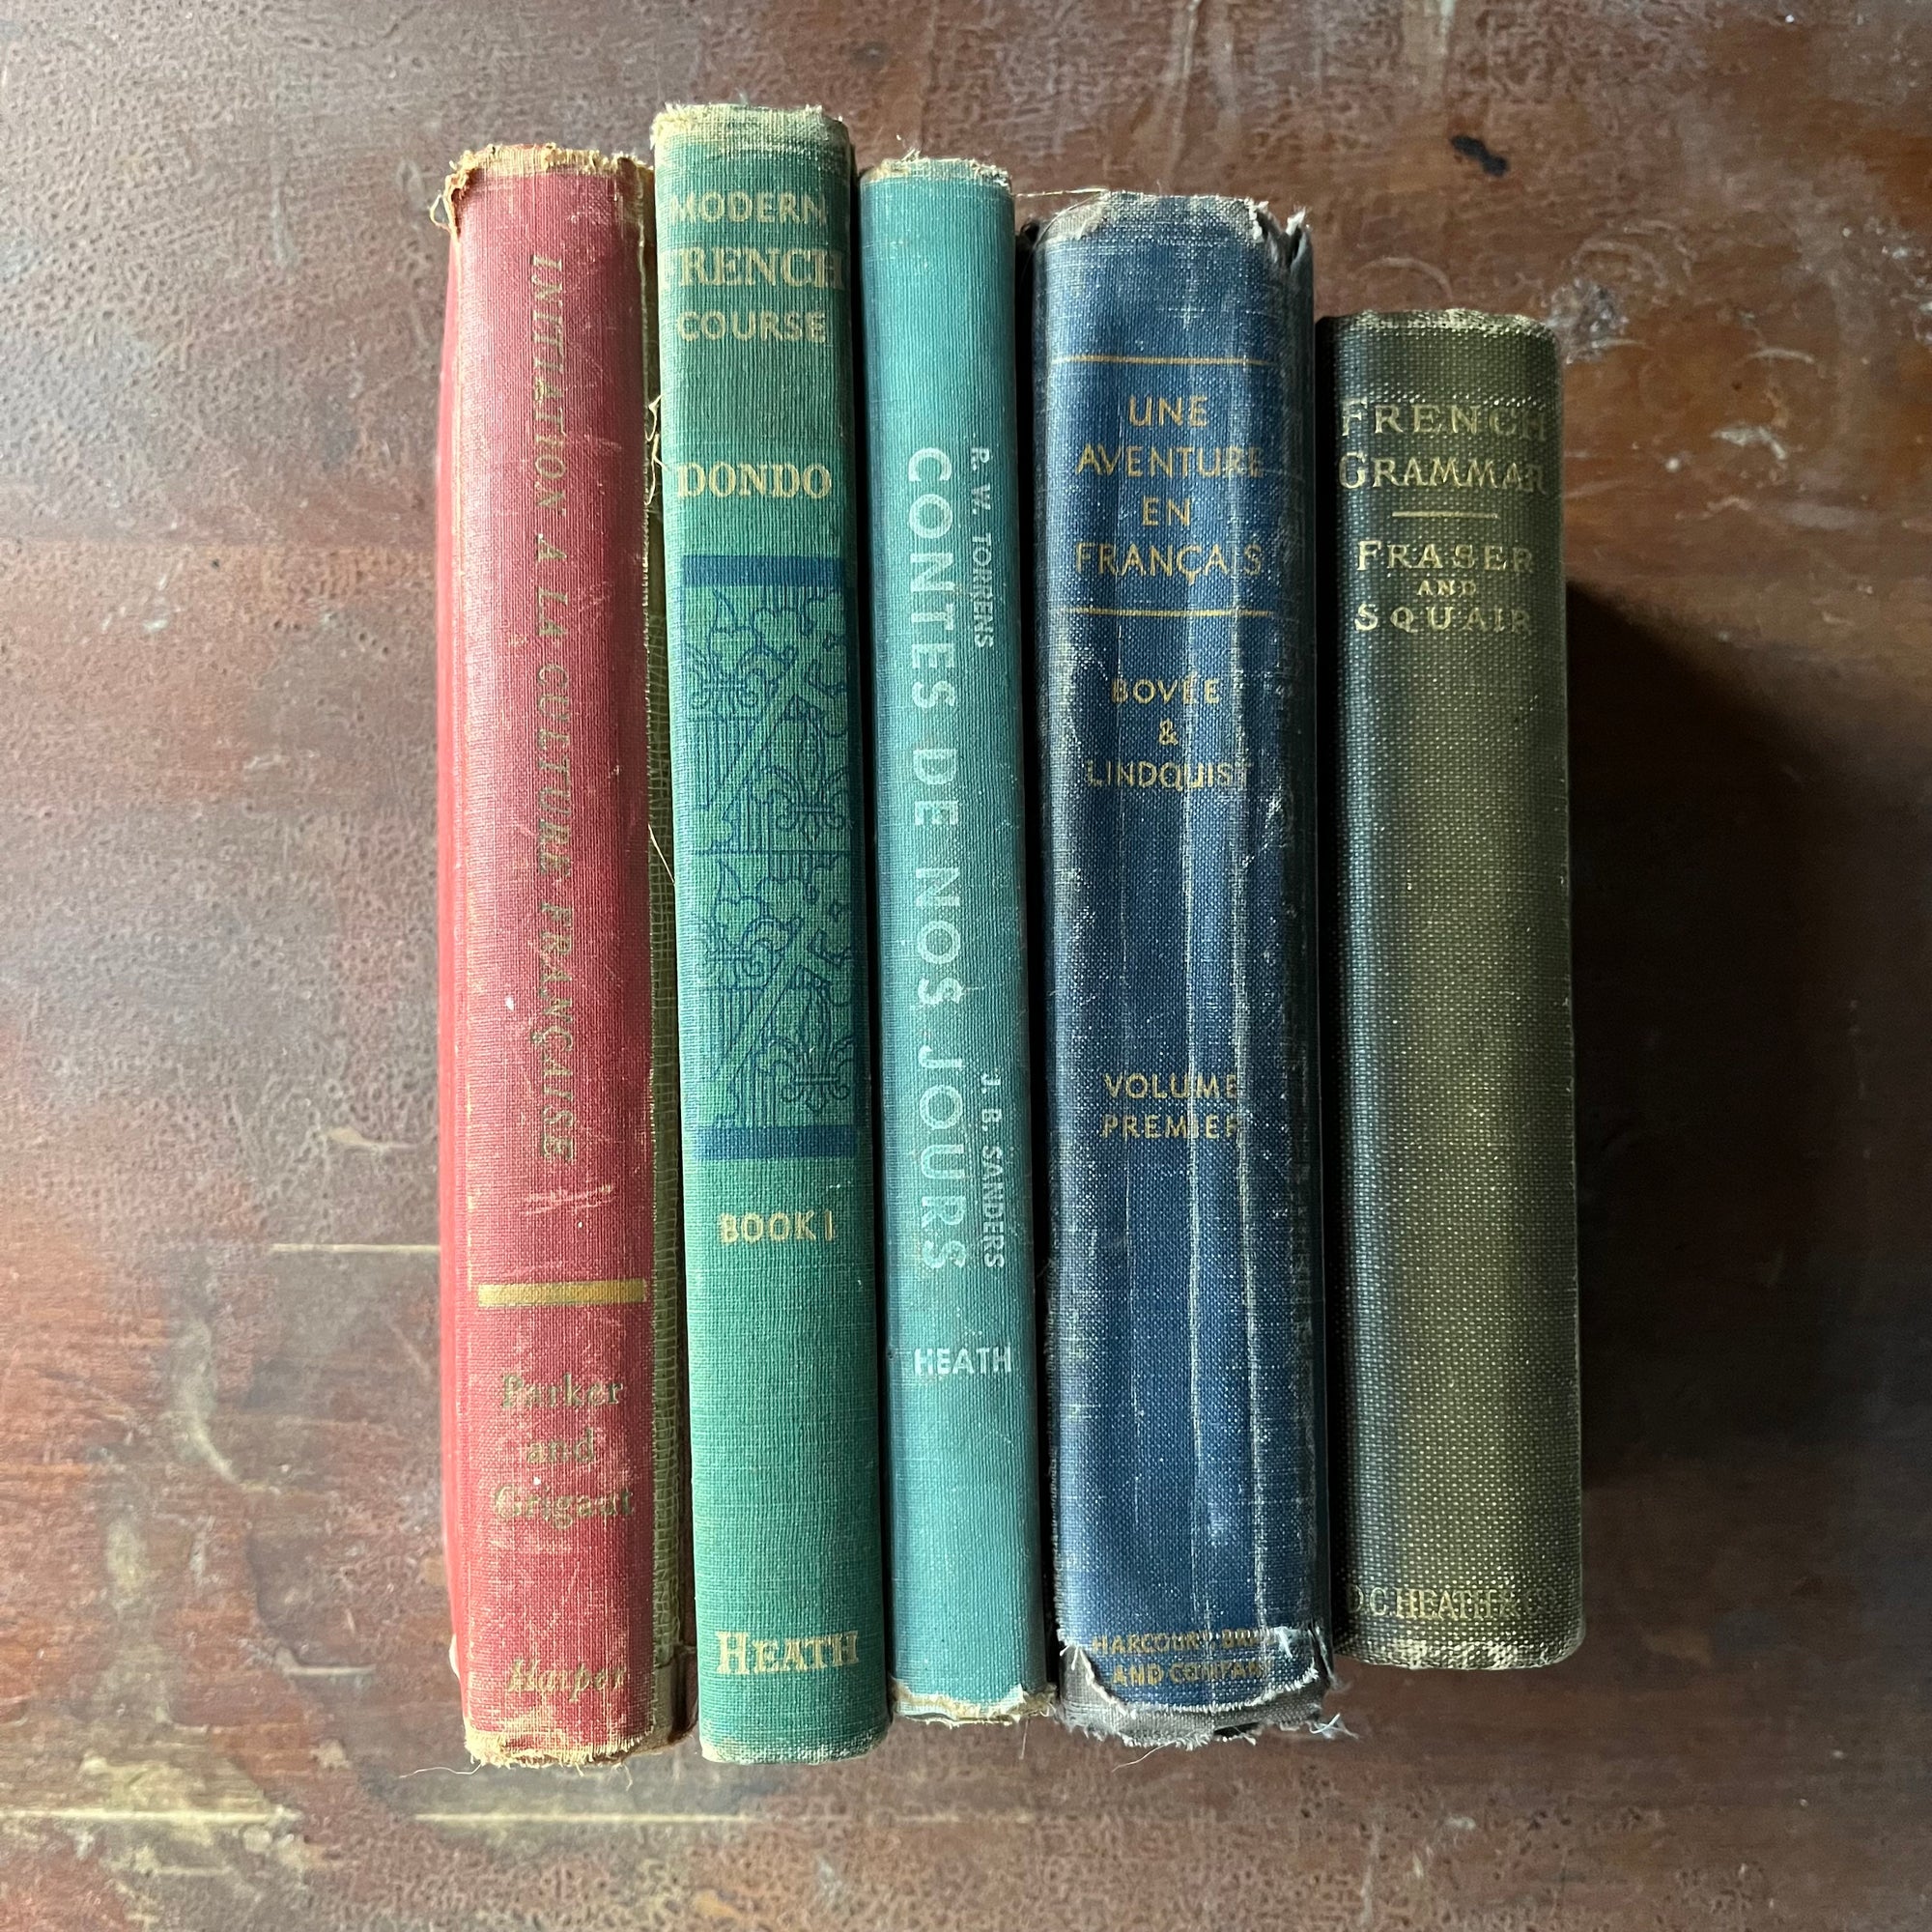 Log Cabin Vintage – vintage non-fiction – vintage French books – book stack – Learn French Book Stack - vintage stack of five french grammar books some written in French - view of the spines